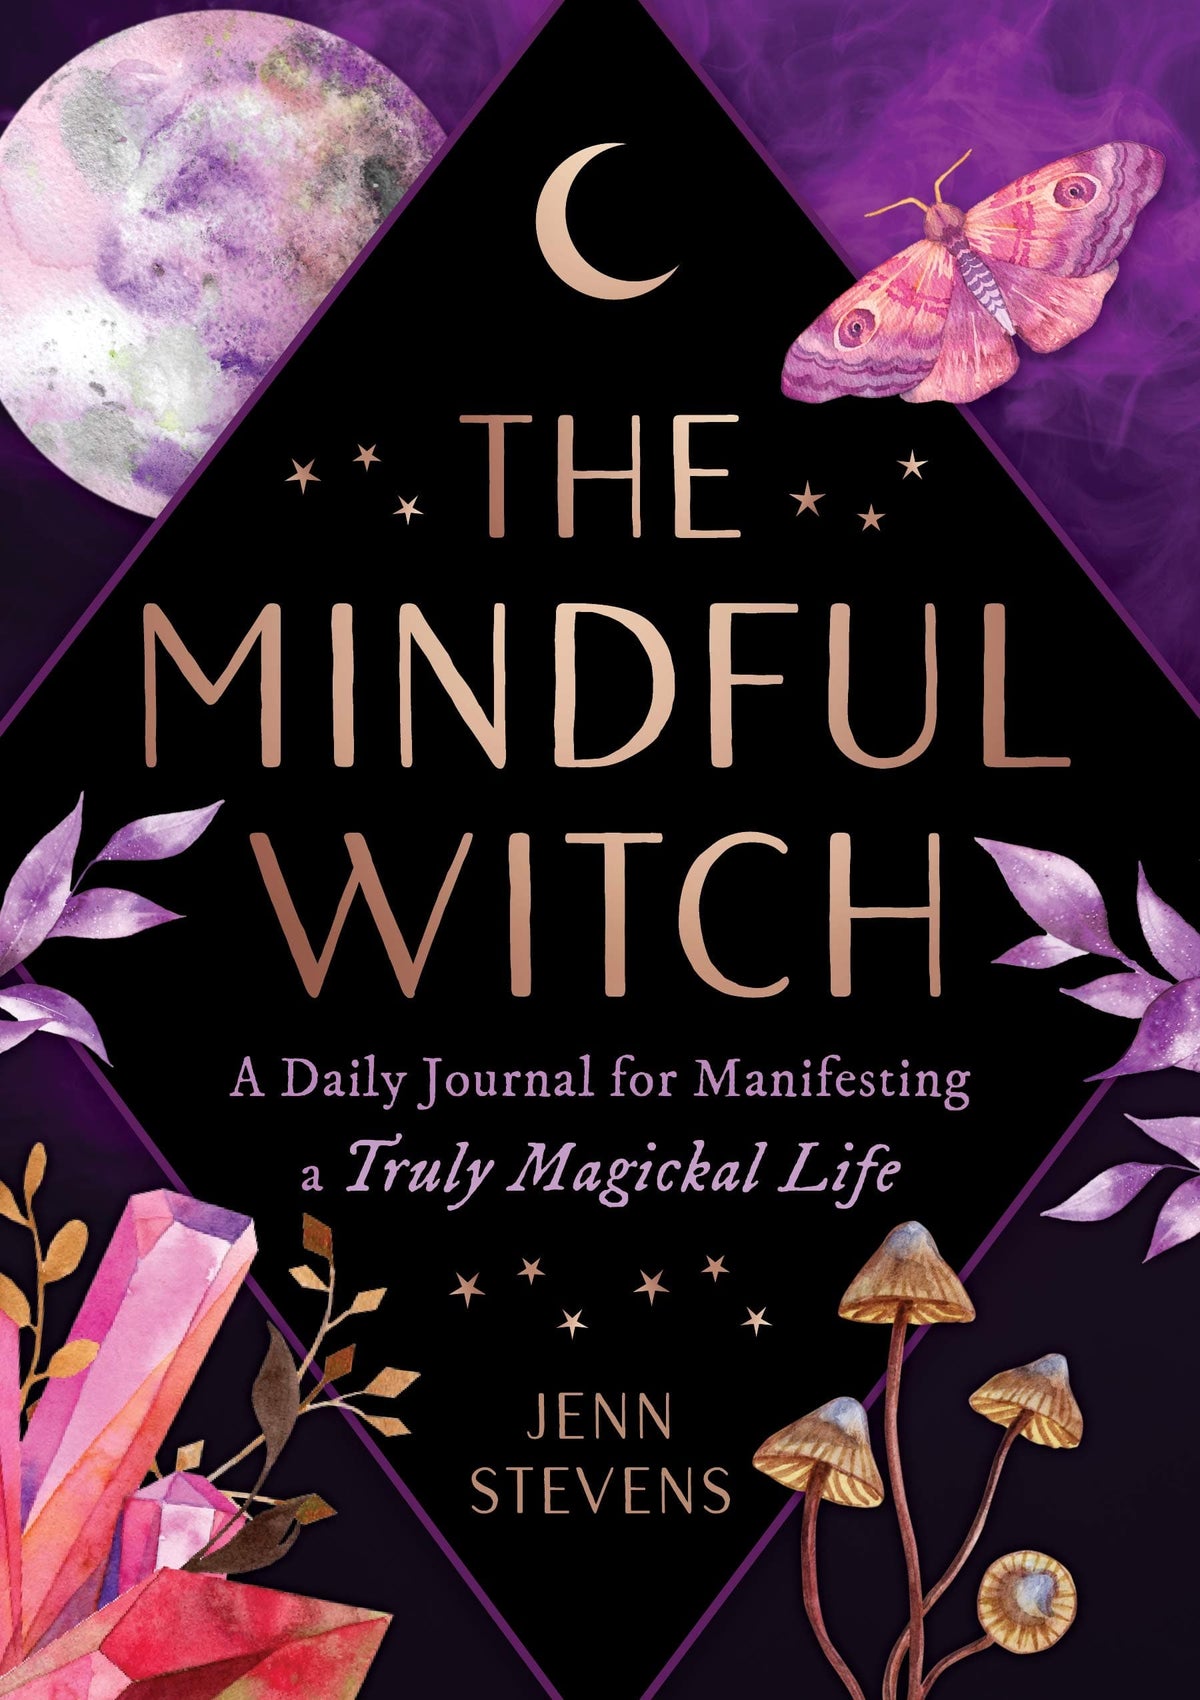 Mindful Witch: Daily Journal for Manifesting a Truly Magickal Life HC - Third Eye